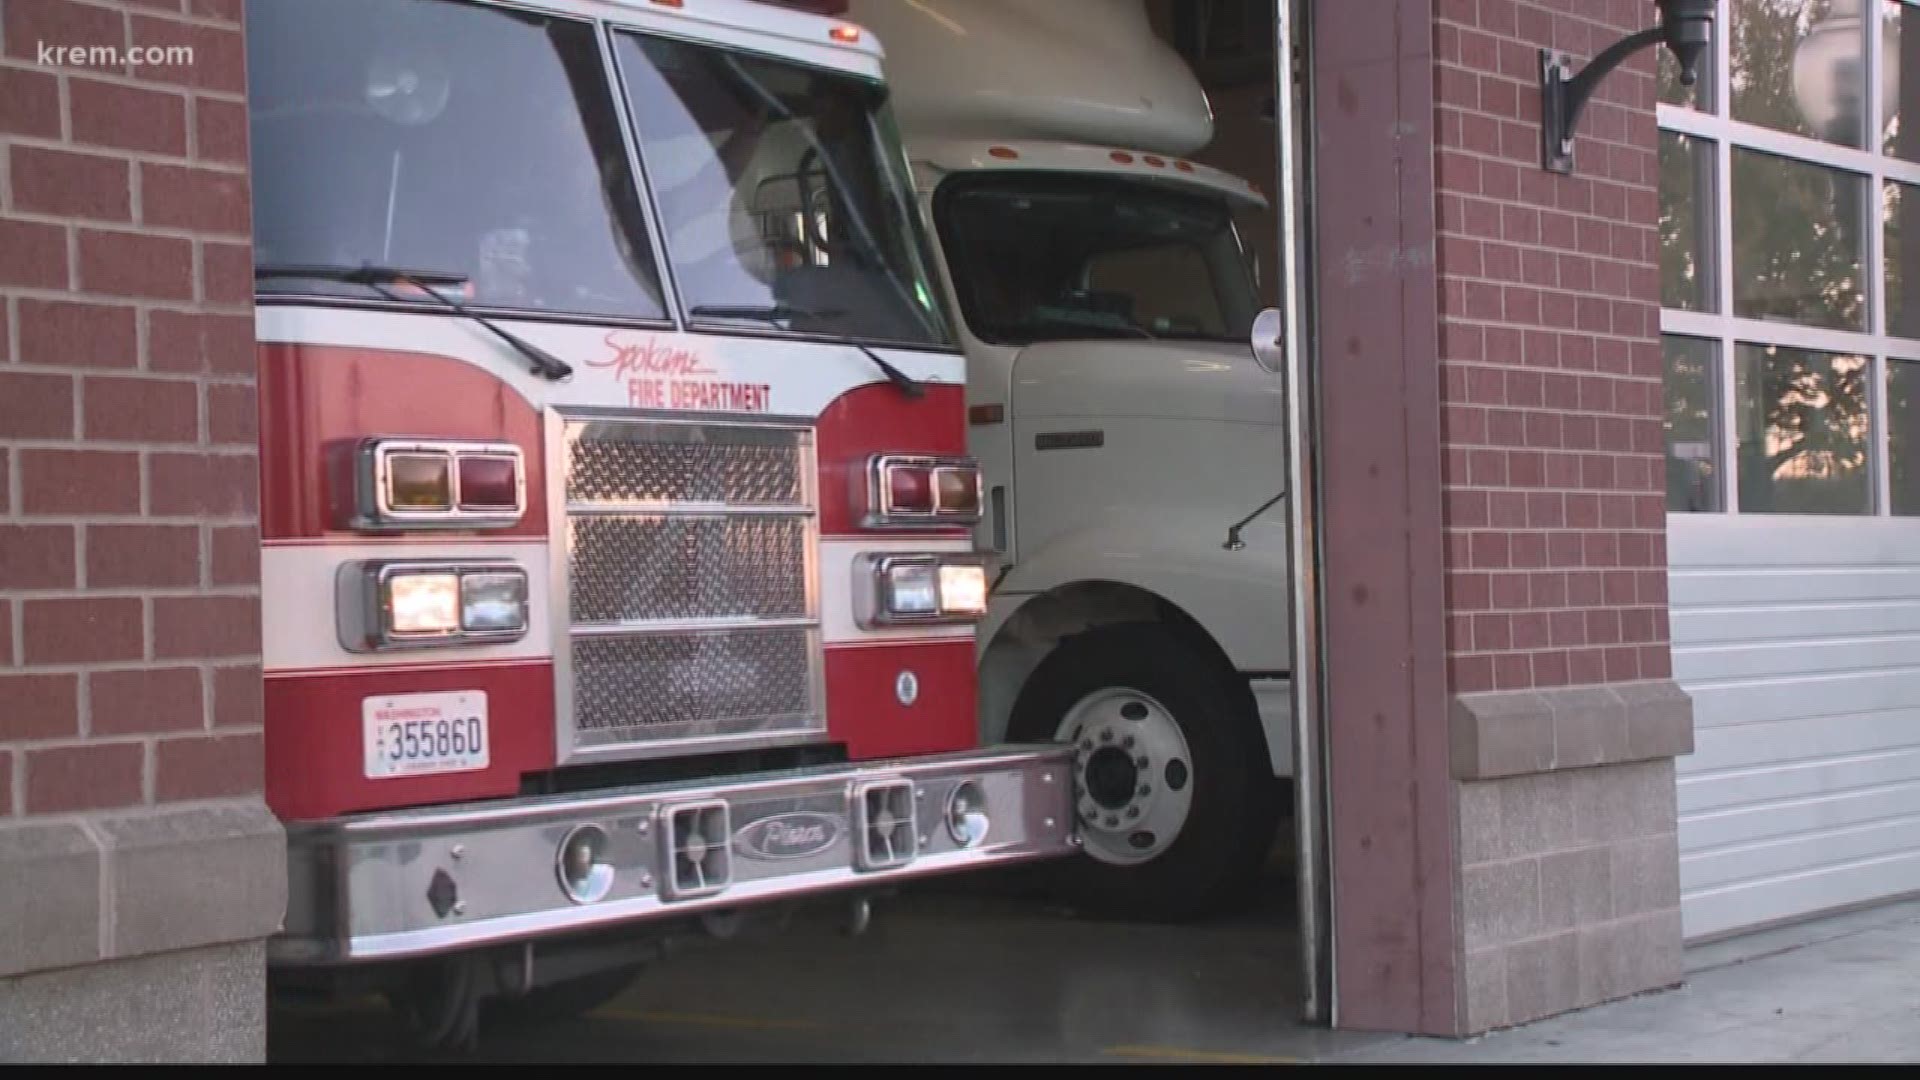 Spokane Fire Chief Brian Schaeffer said eight of the firefighters are showing symptoms and one is hospitalized.